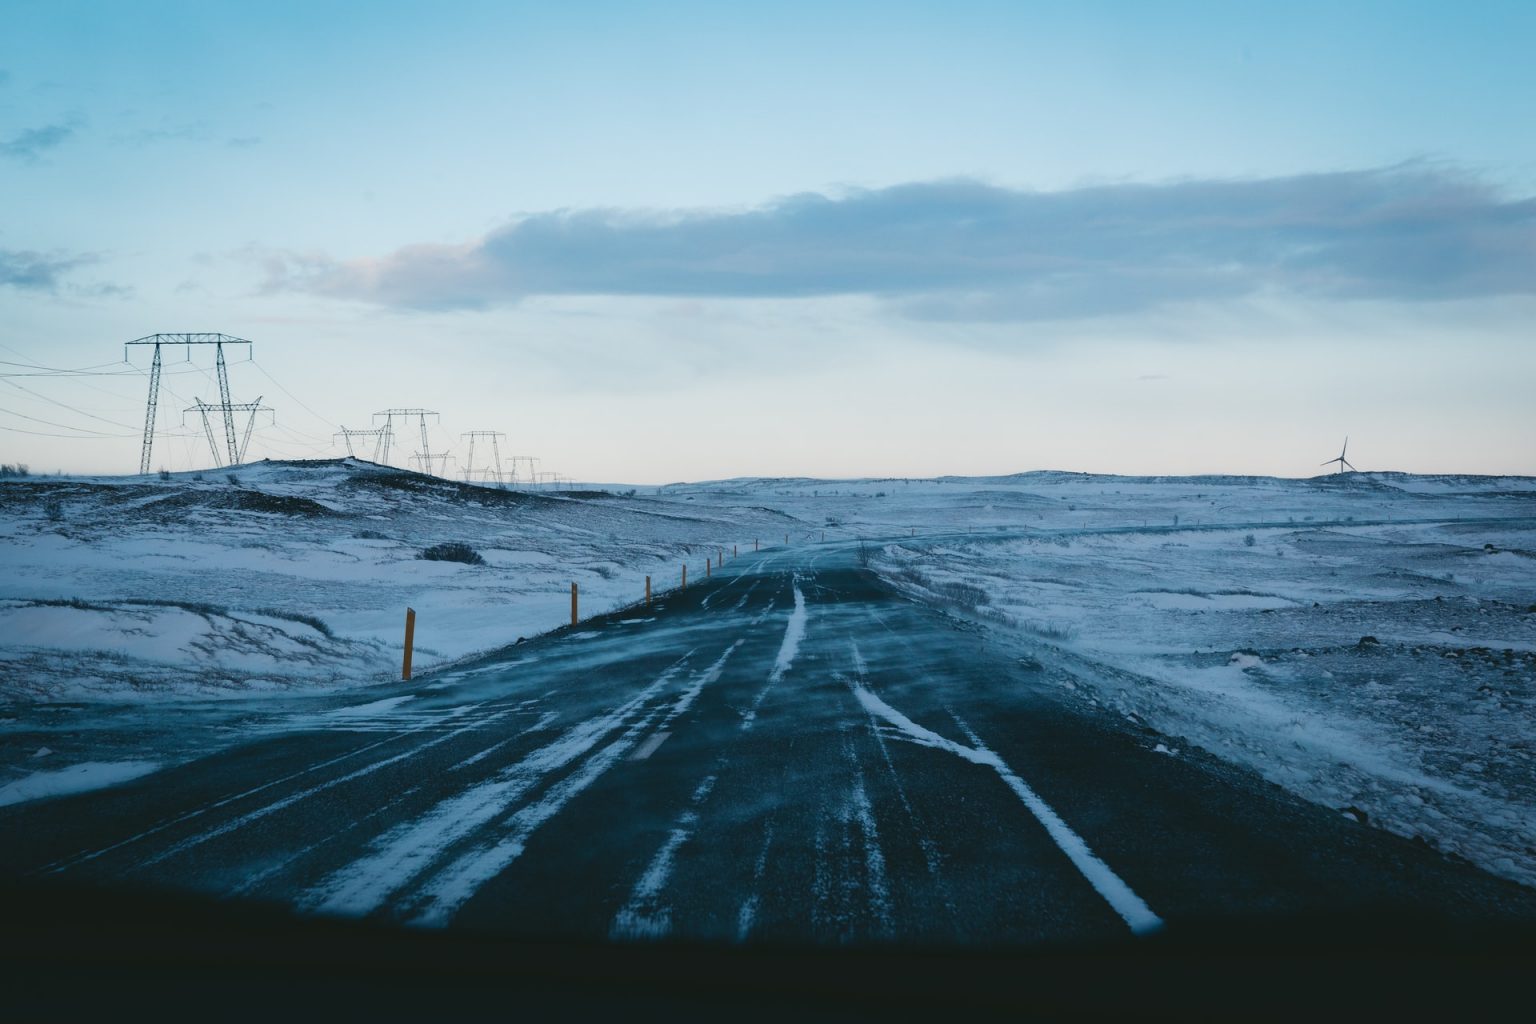 road condition of Iceland during wintertime when the weather is nice